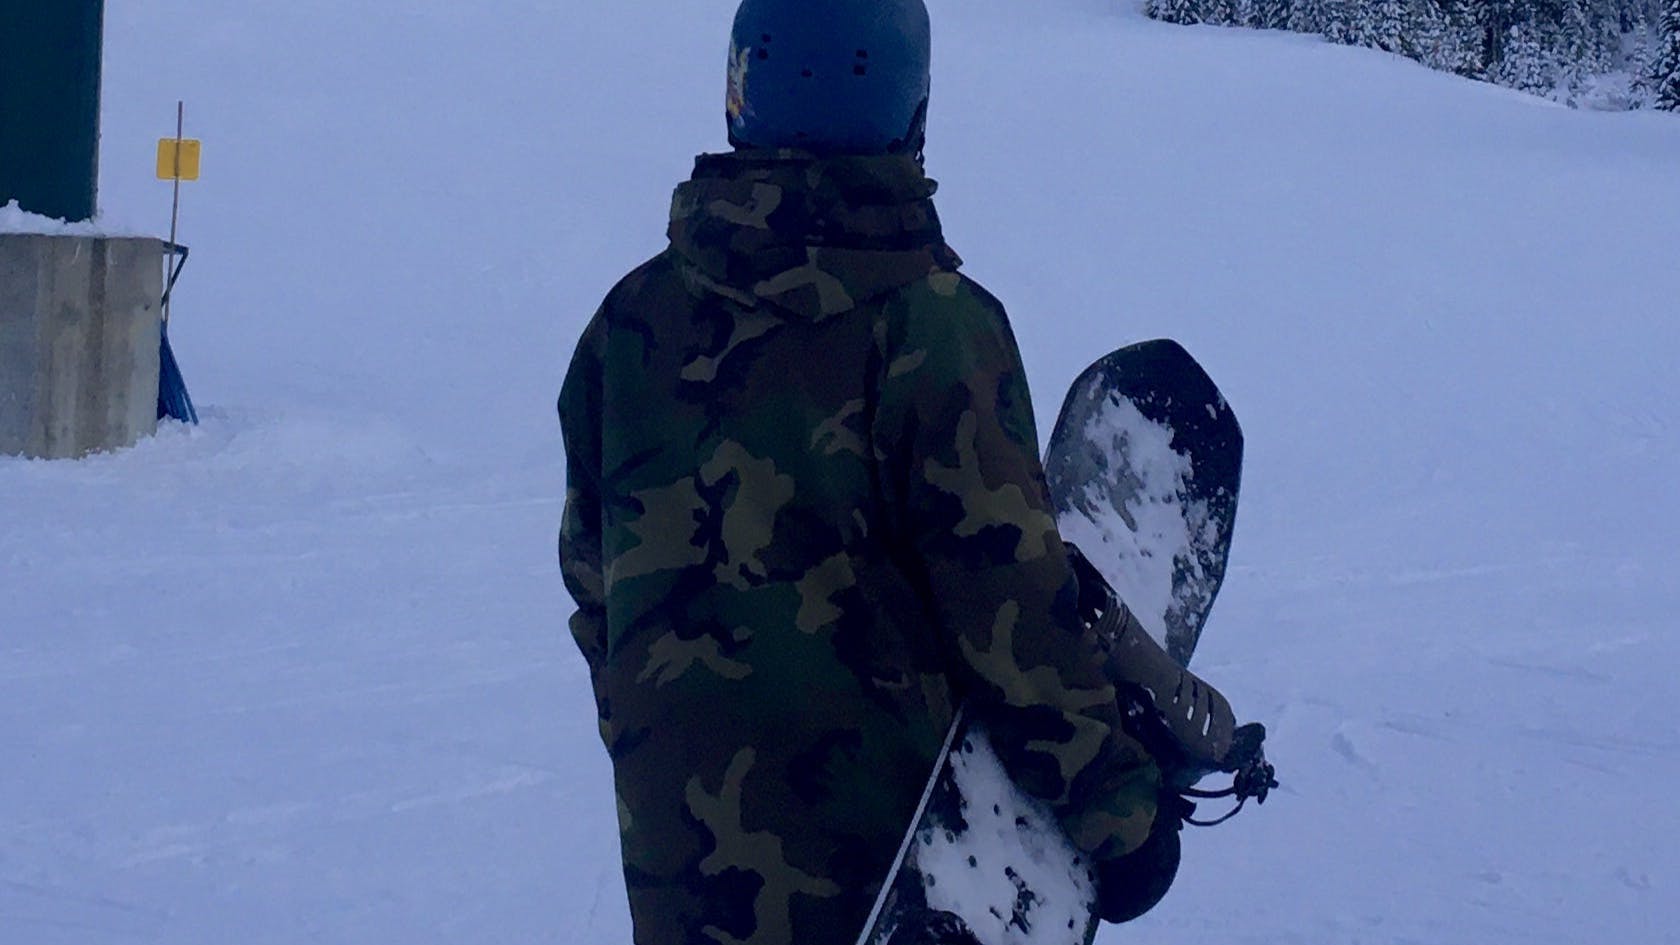 A man with a snowboard looks off at a snowy mountain in the distance.